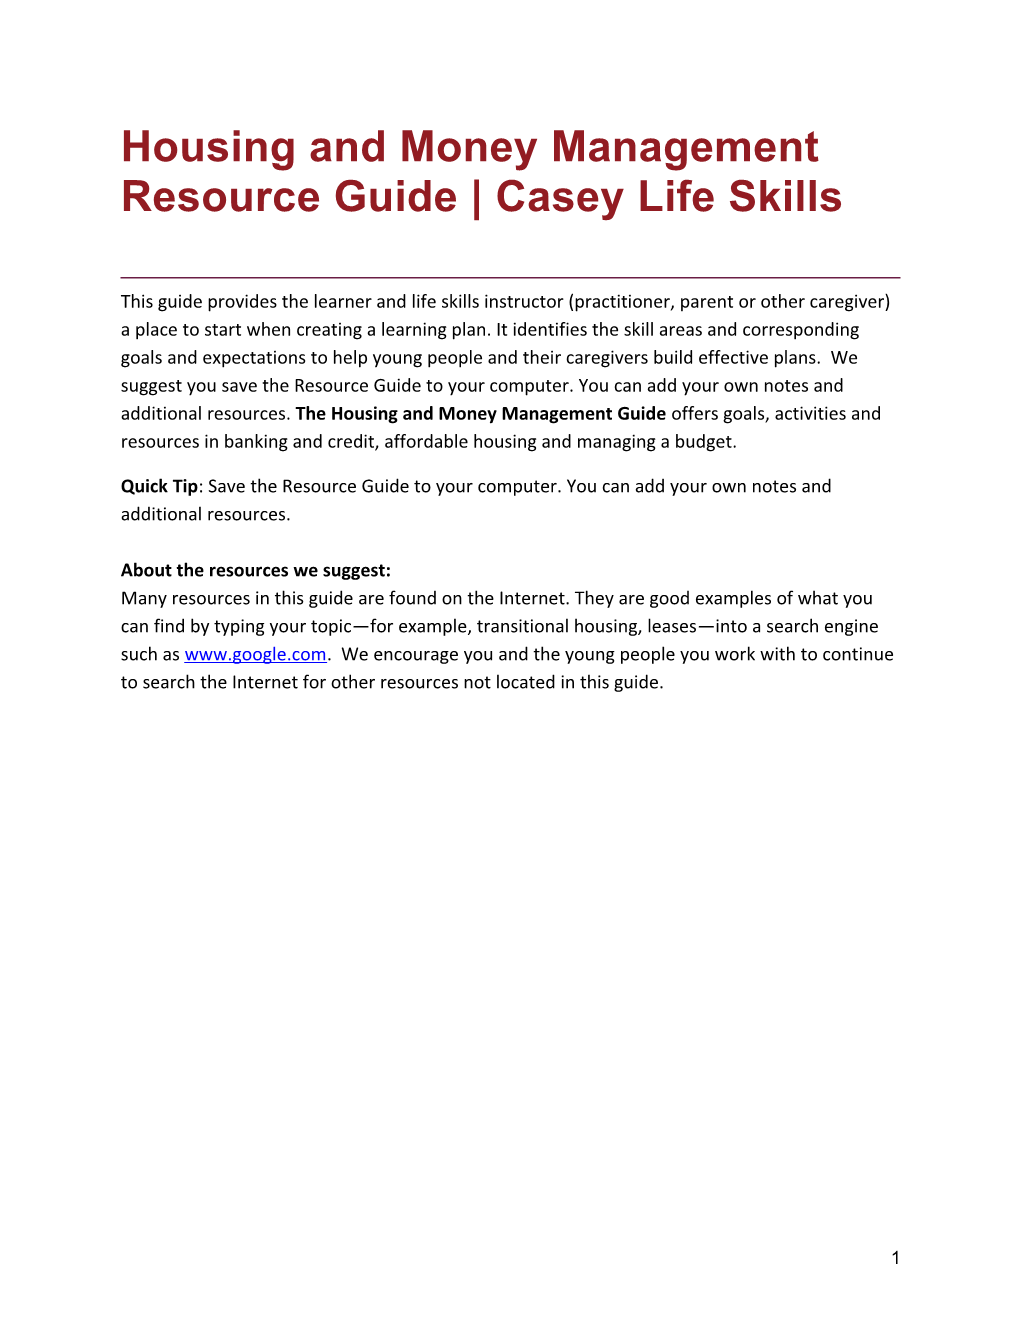 Housing and Money Management Resource Guide Casey Life Skills